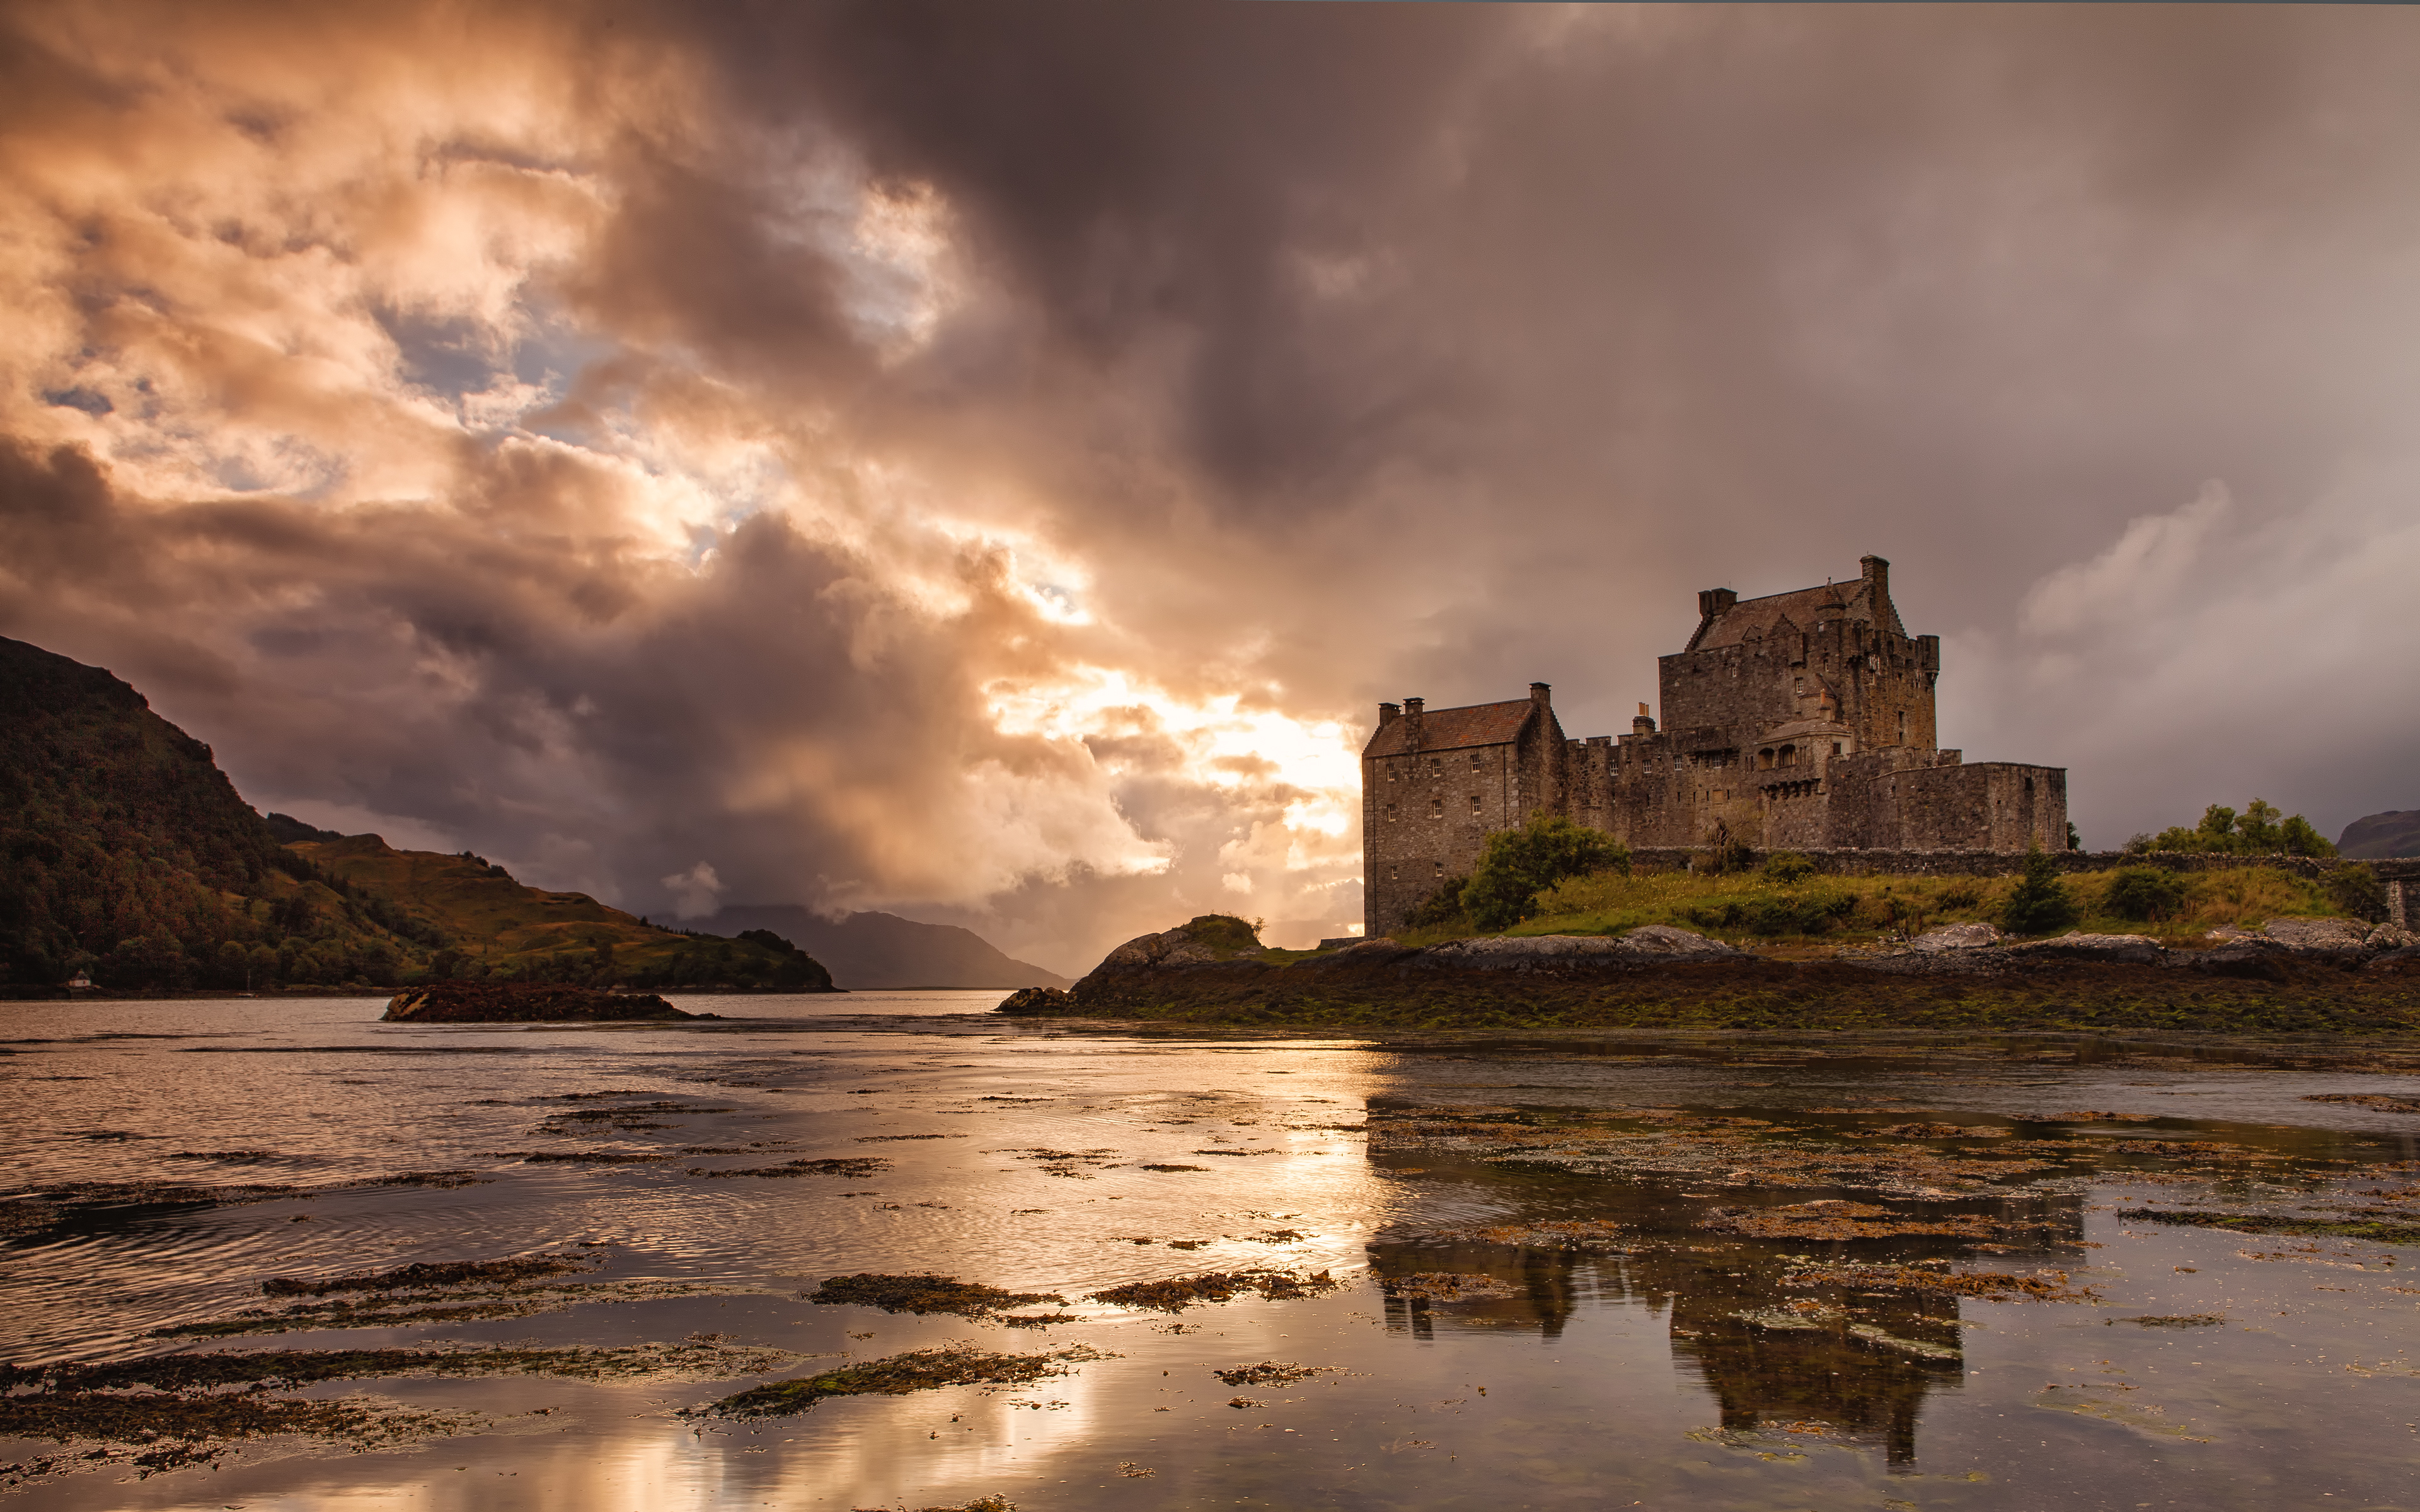  Castle Scotland wallpapers and images   wallpapers pictures photos